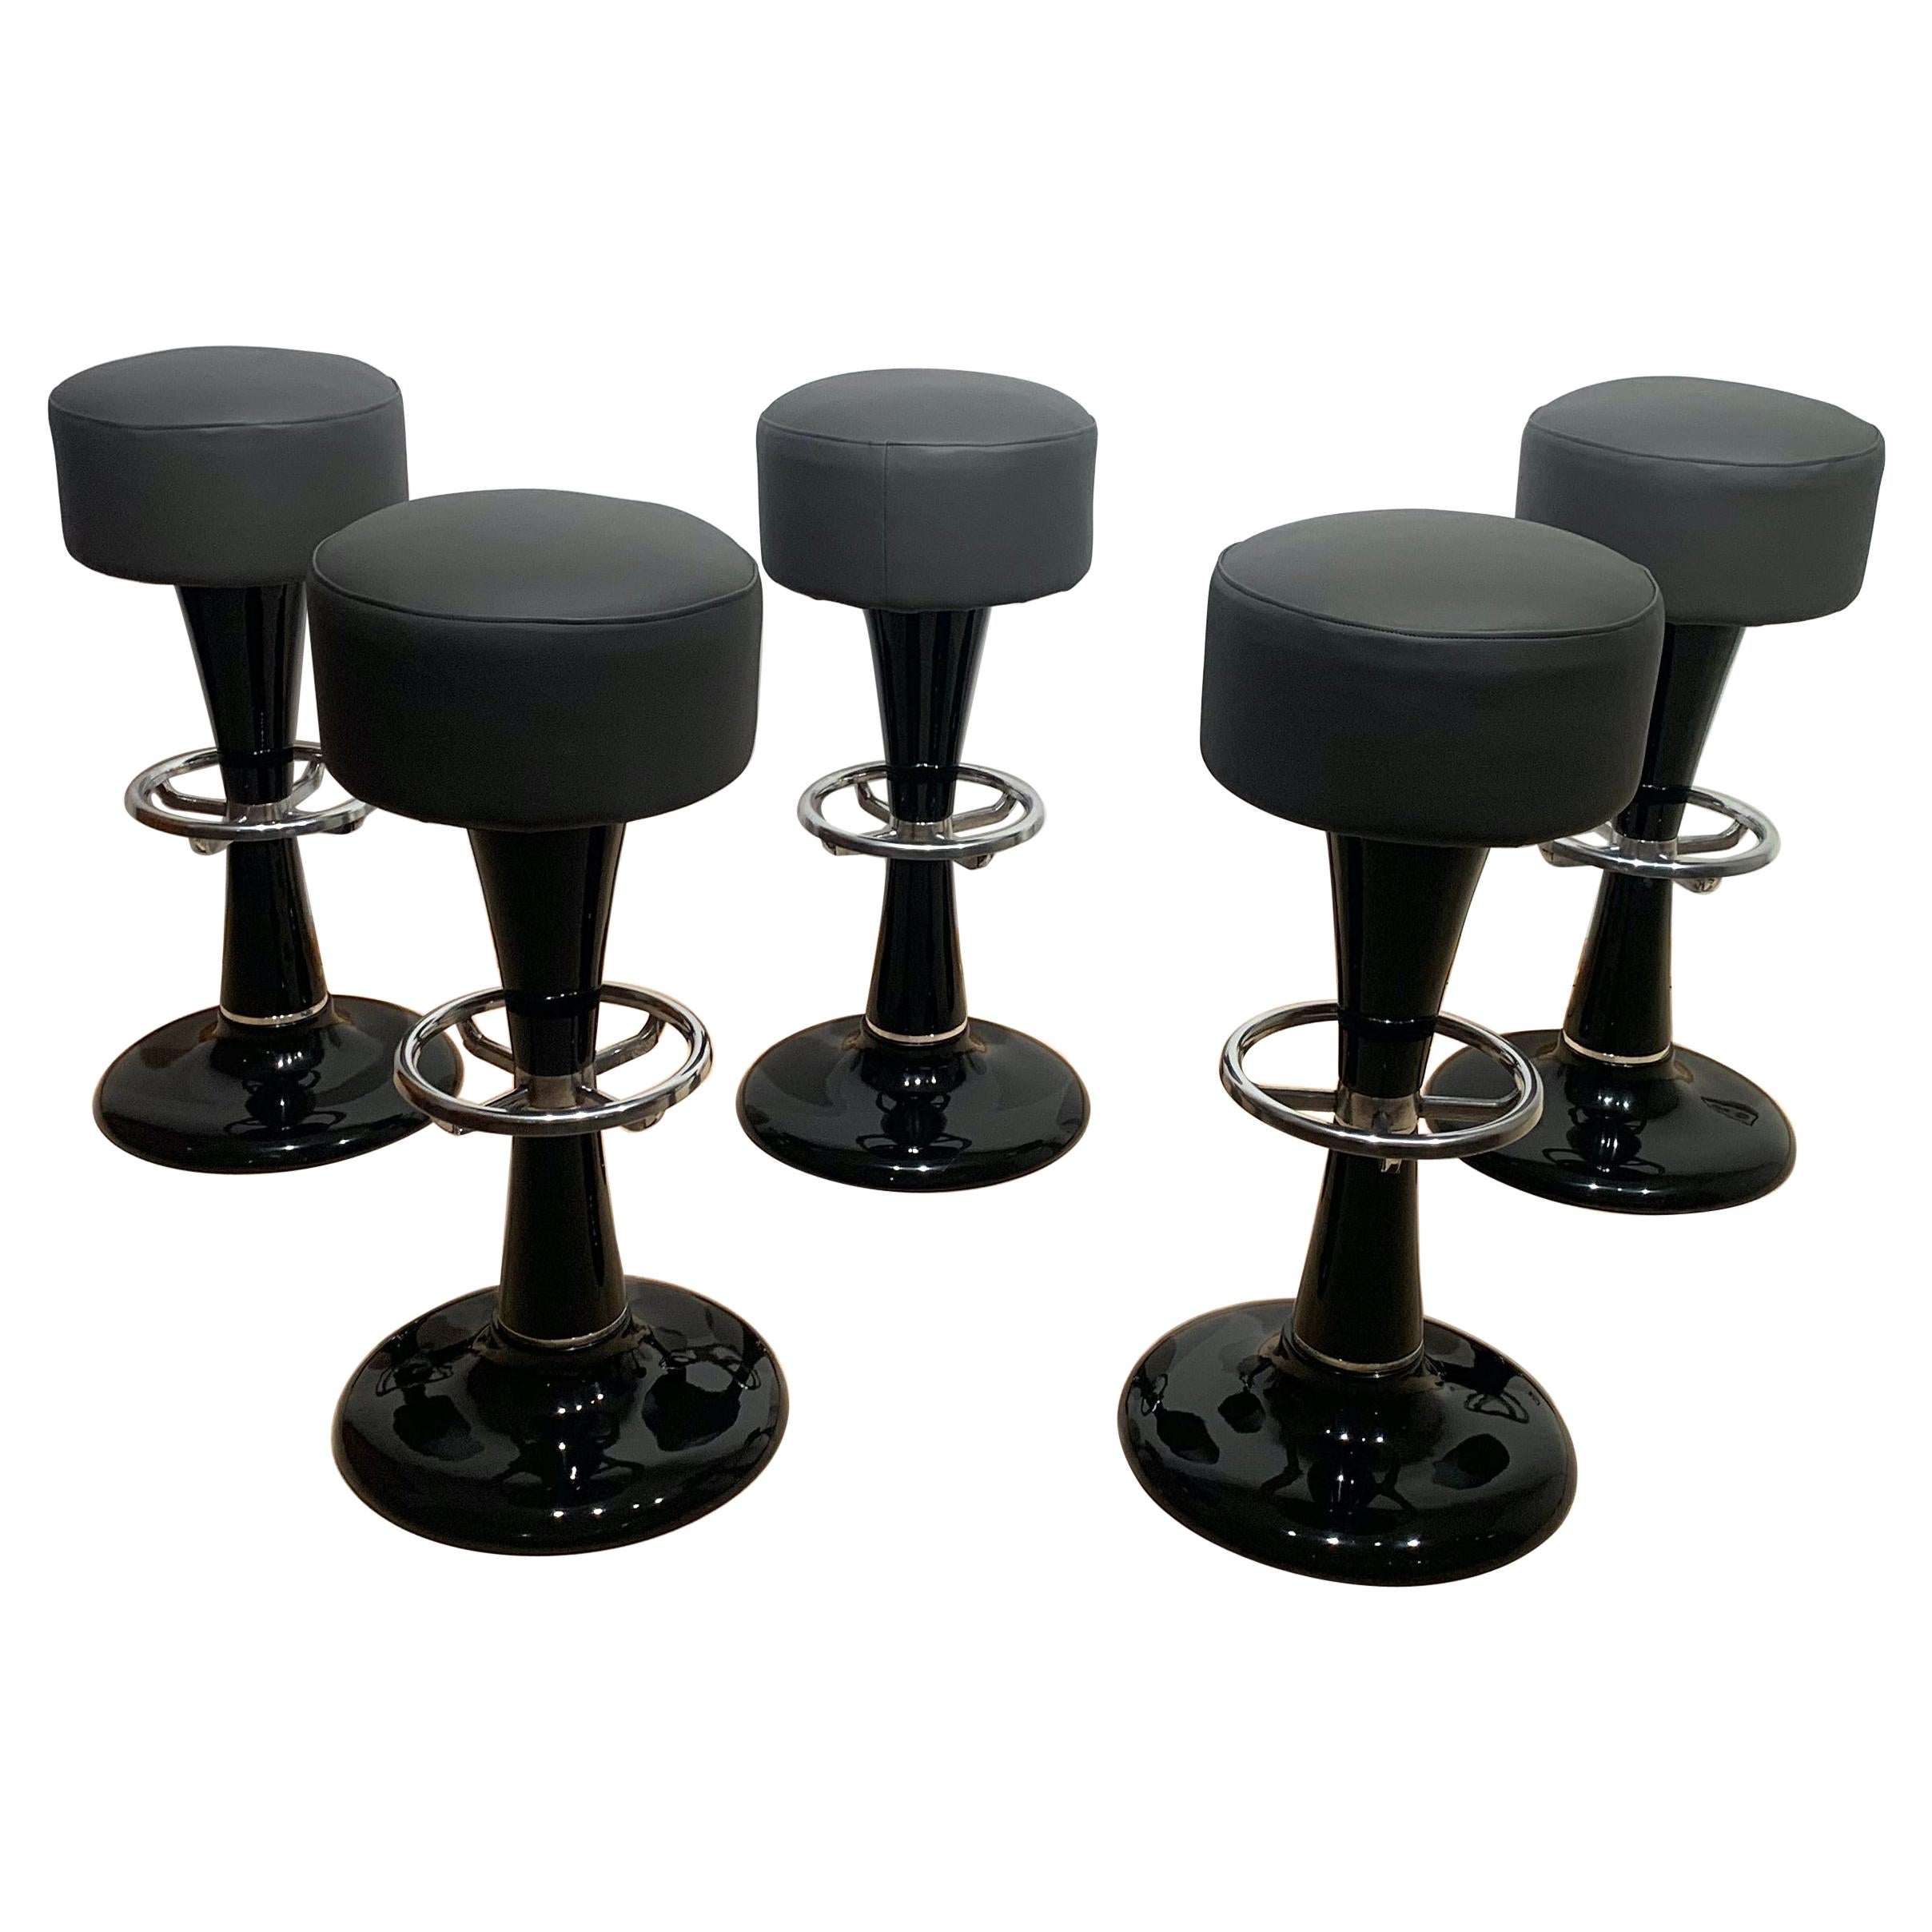 Five Barstools, Black Lacqueered Metal, Chromed, Grey Leather, France, 1950s